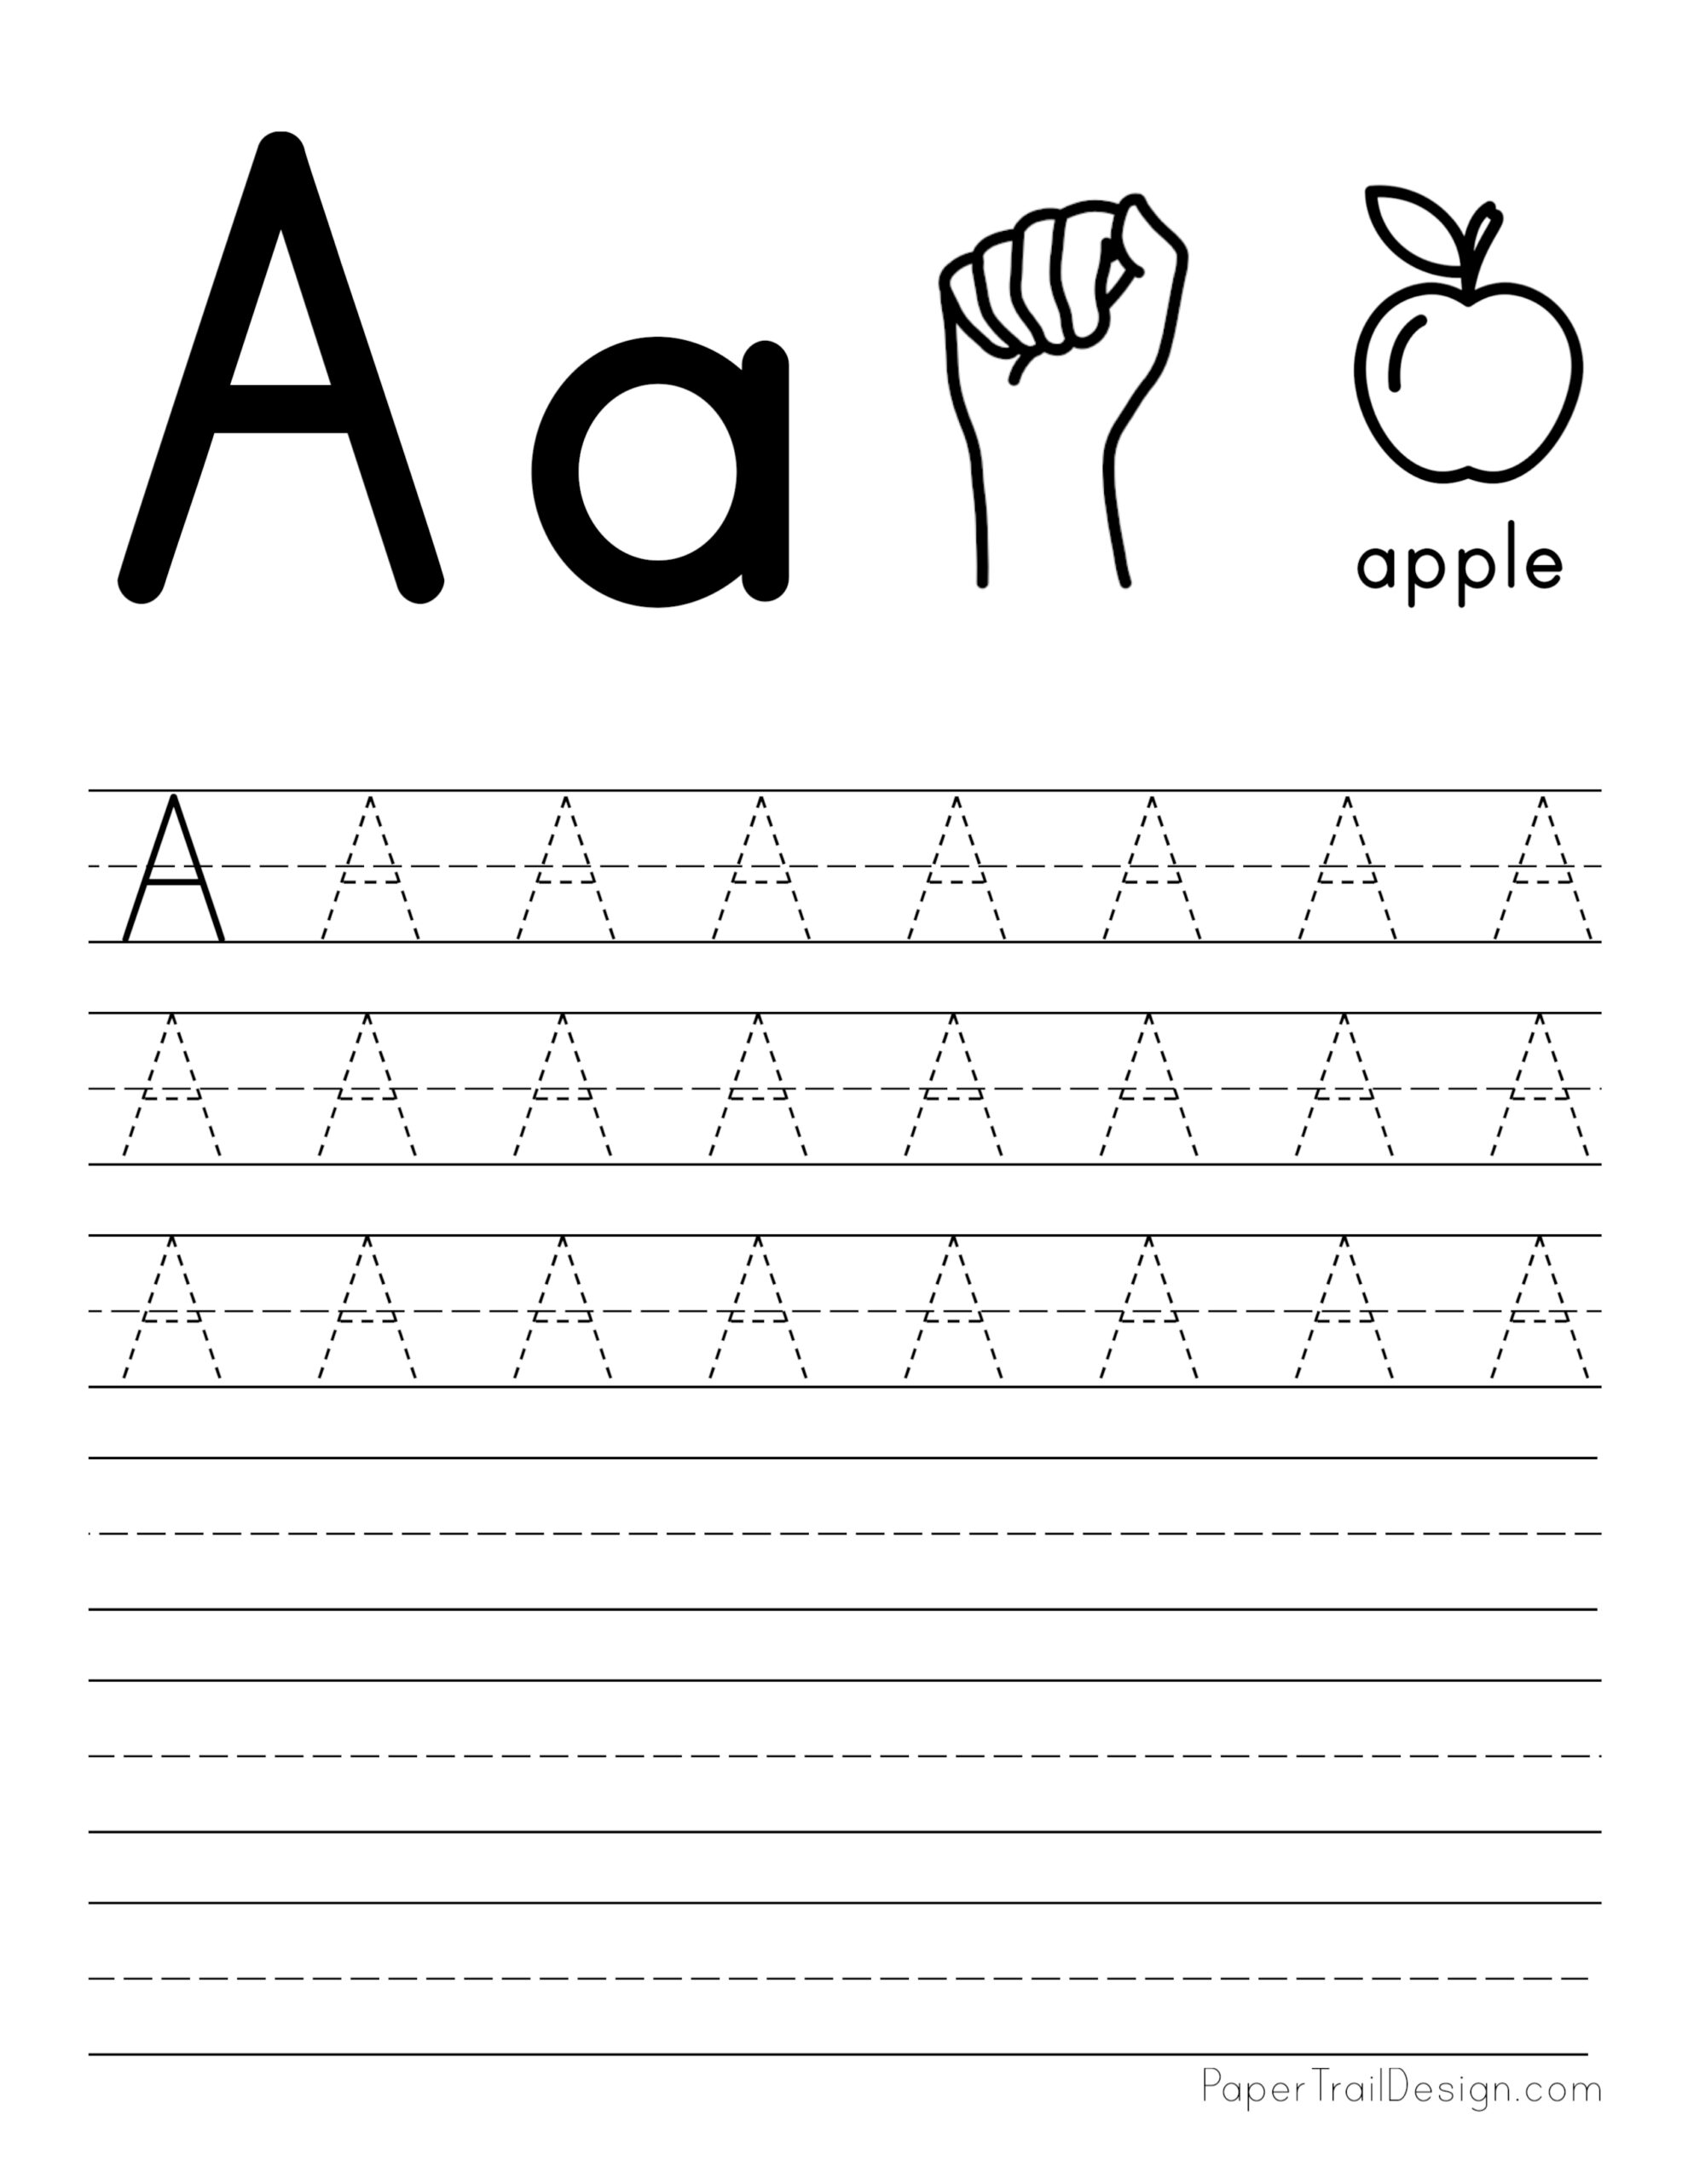 capital-letters-alphabet-tracing-sheets